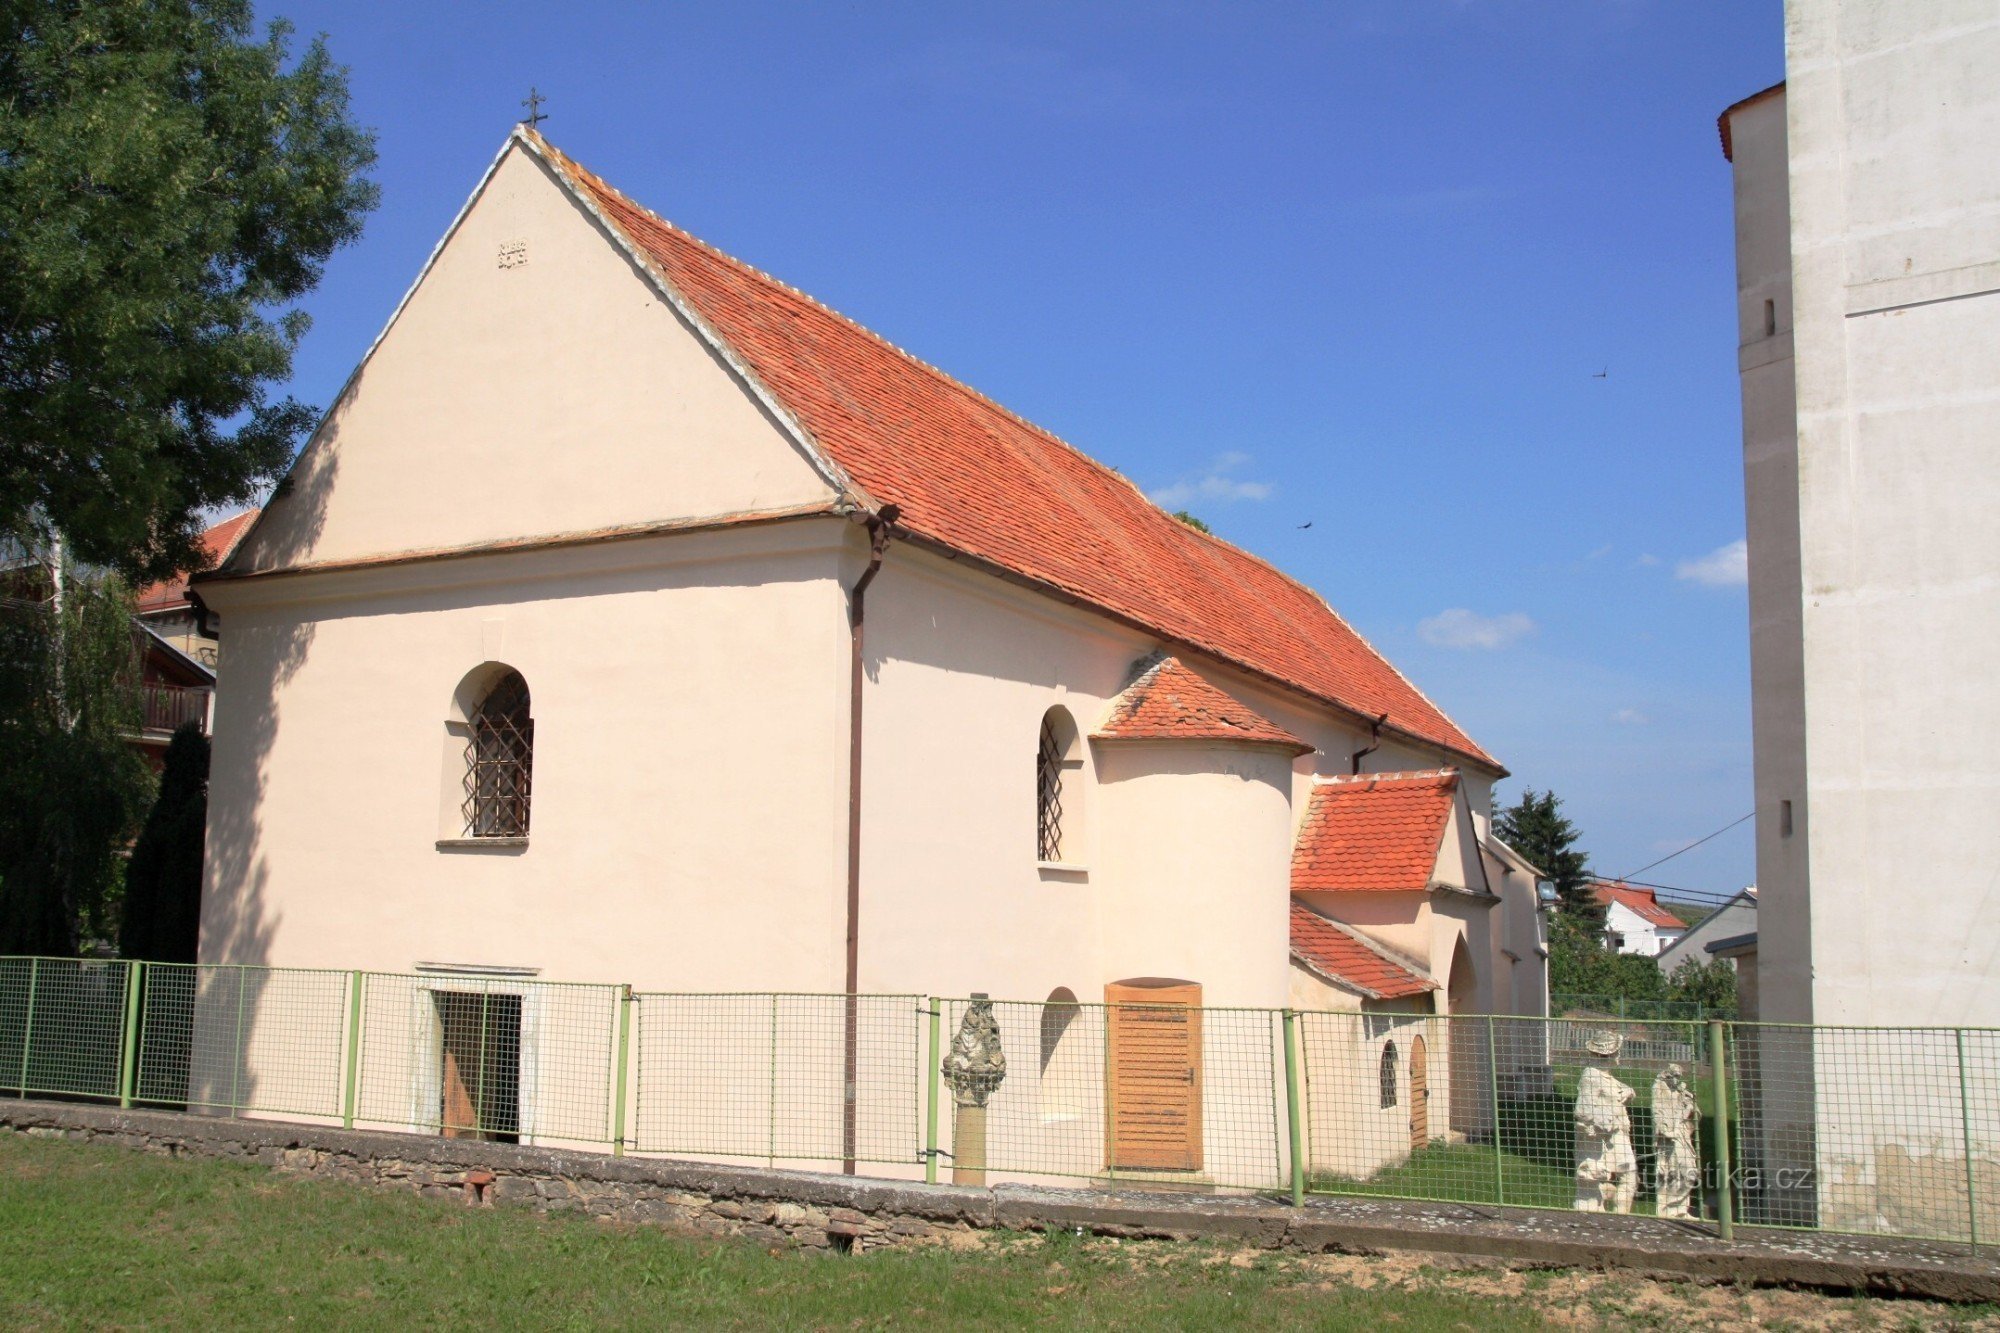 Přítluky - church of St. Markets from the west